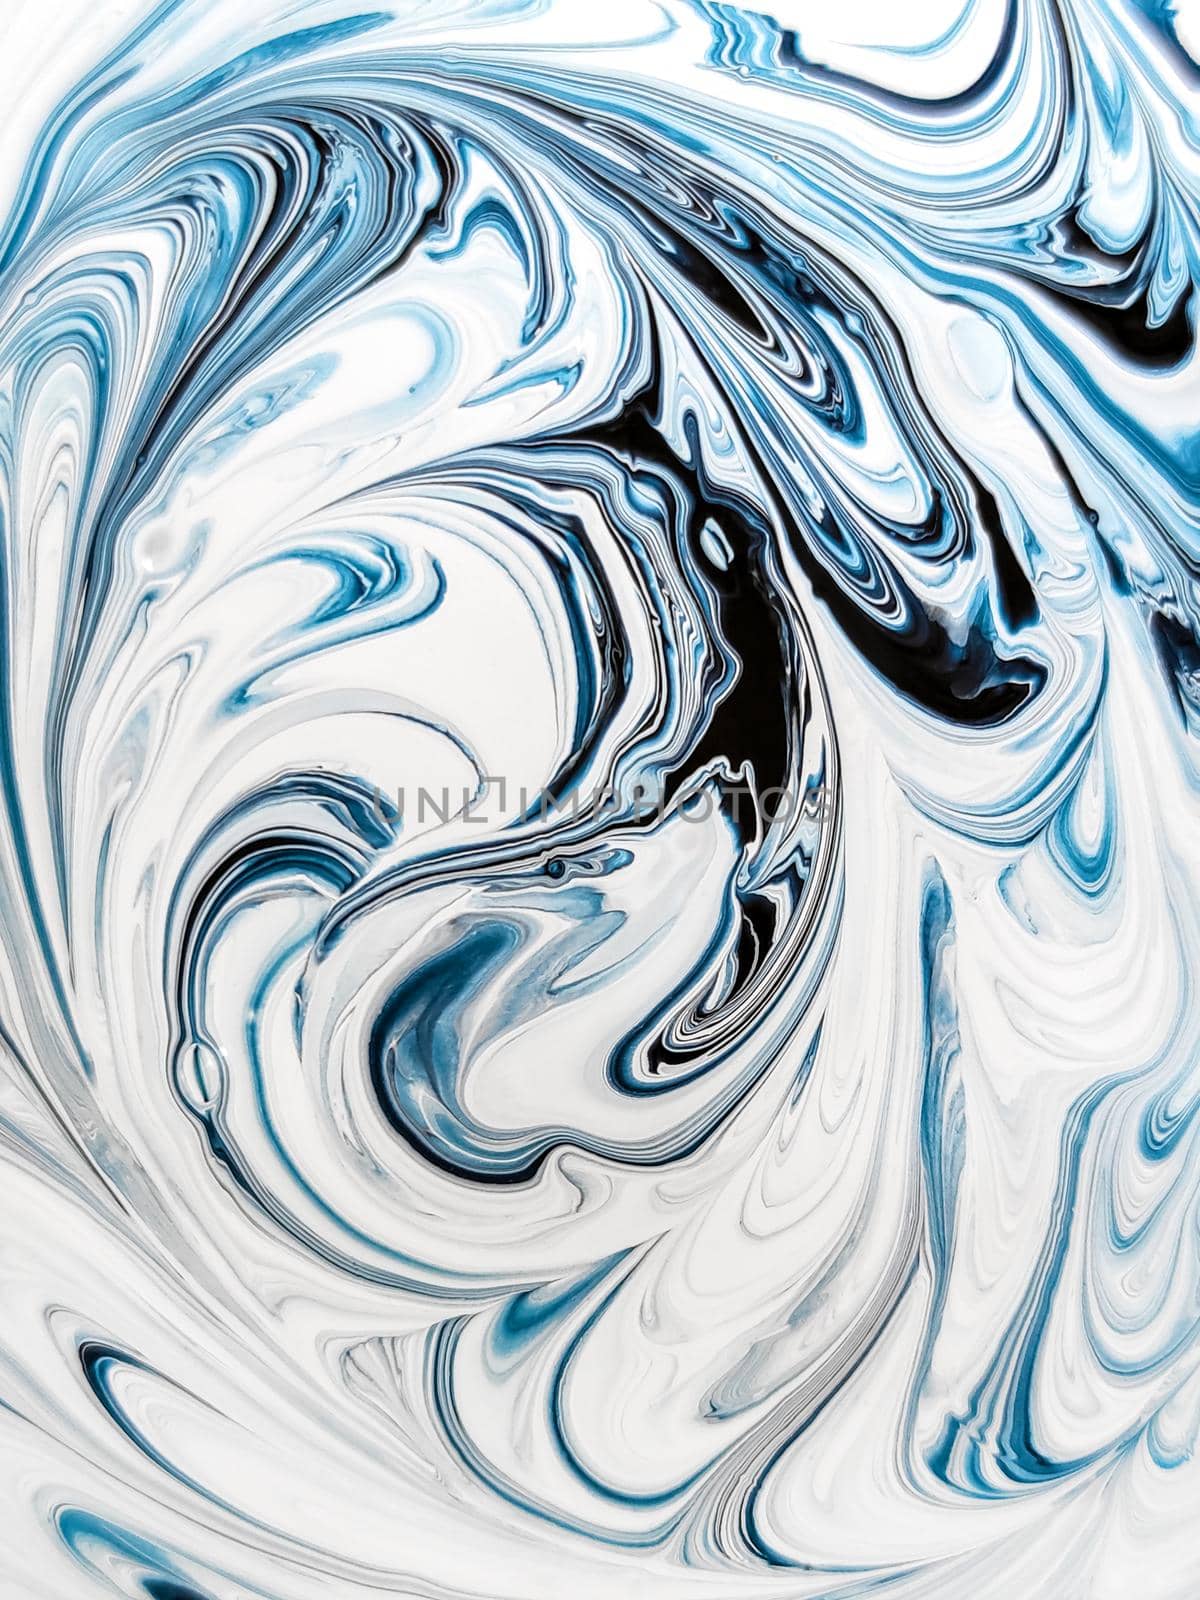 Background of an abstract blue-and-white drawing, close up. by Laguna781